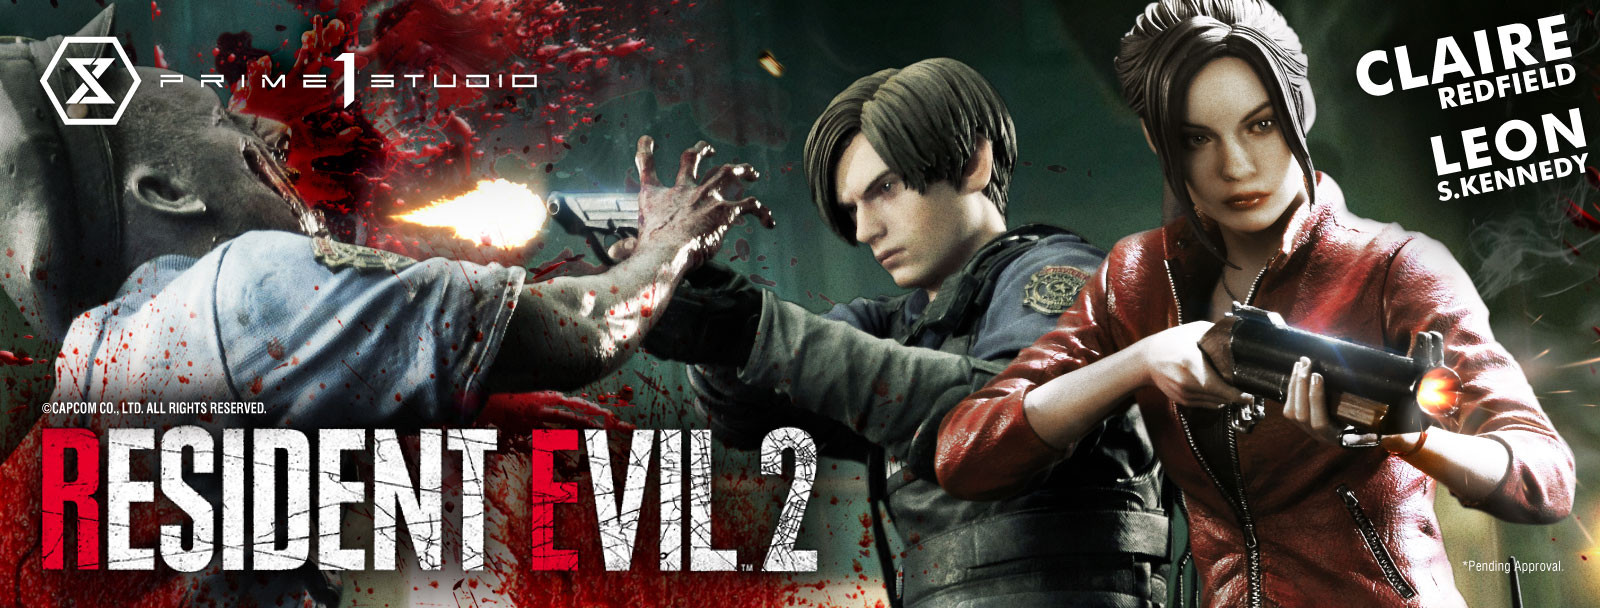 Resident Evil 2 Campaign RE275